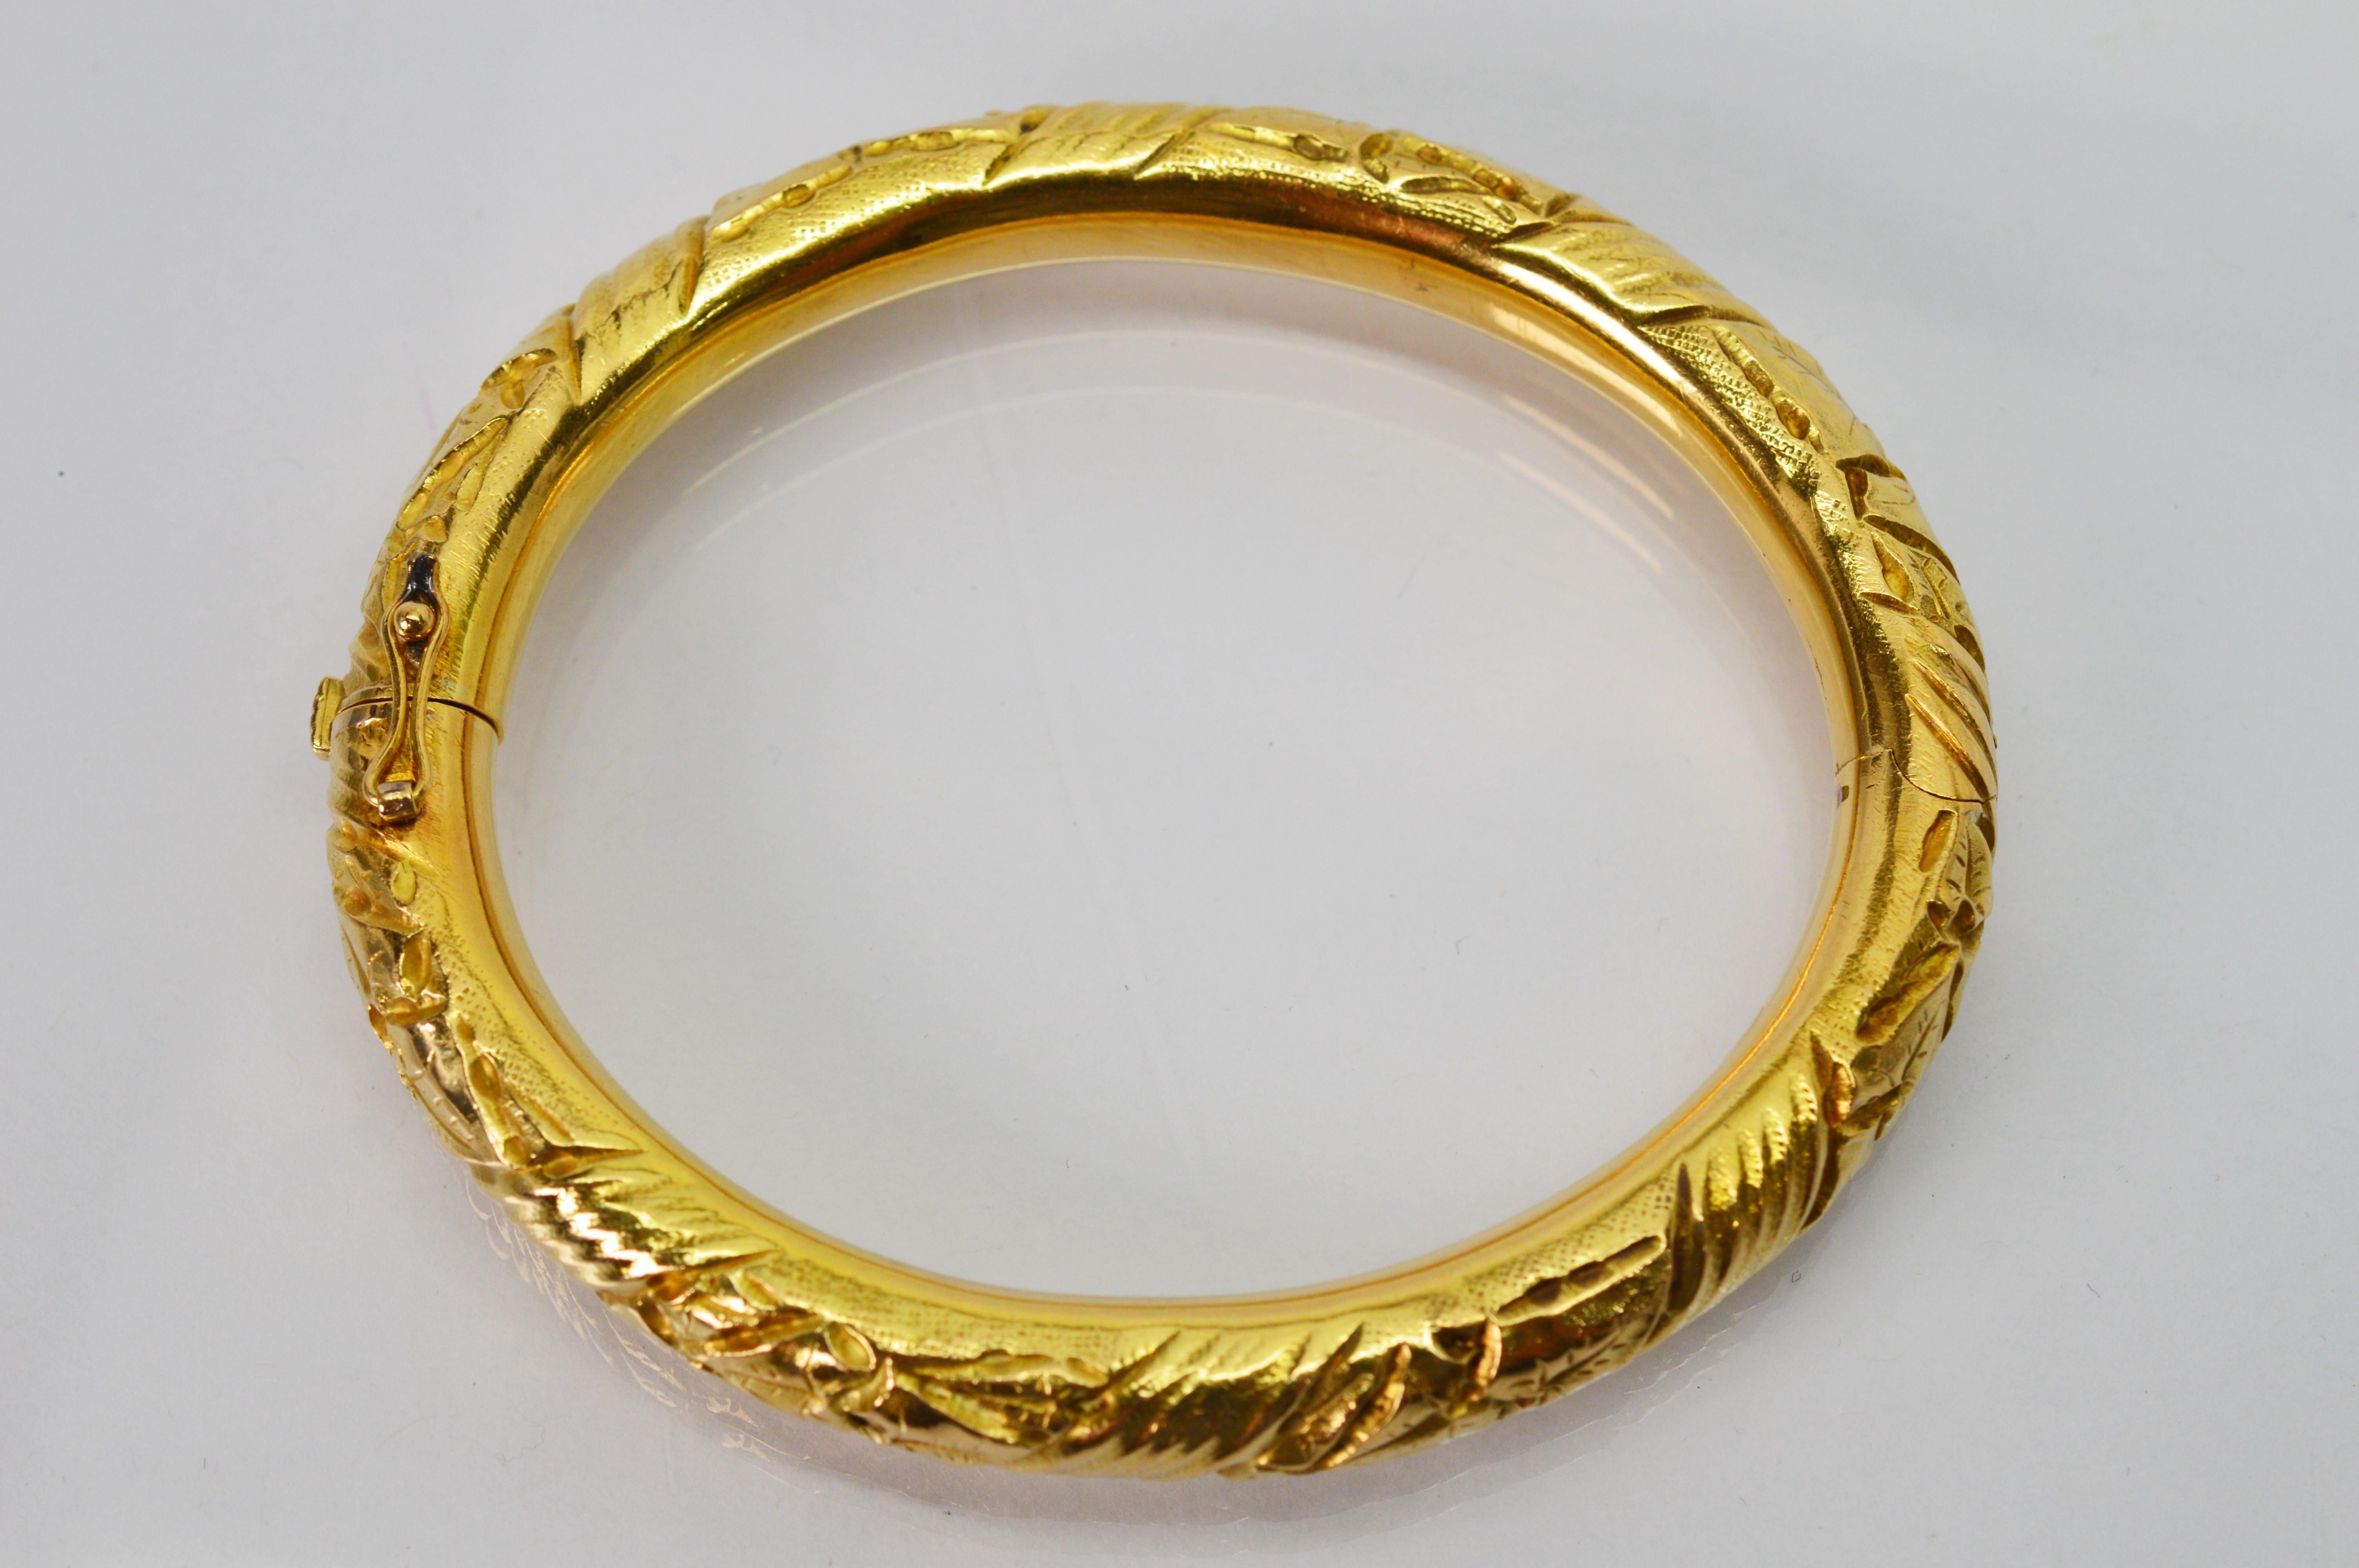 Artfully rustic and quality Italian crafted in eighteen karat 18k yellow gold, this substantially sized retro style bangle bracelet has a bold bright look. Rounded edges and lighter tubular band construction with an 8.3 mm width make this